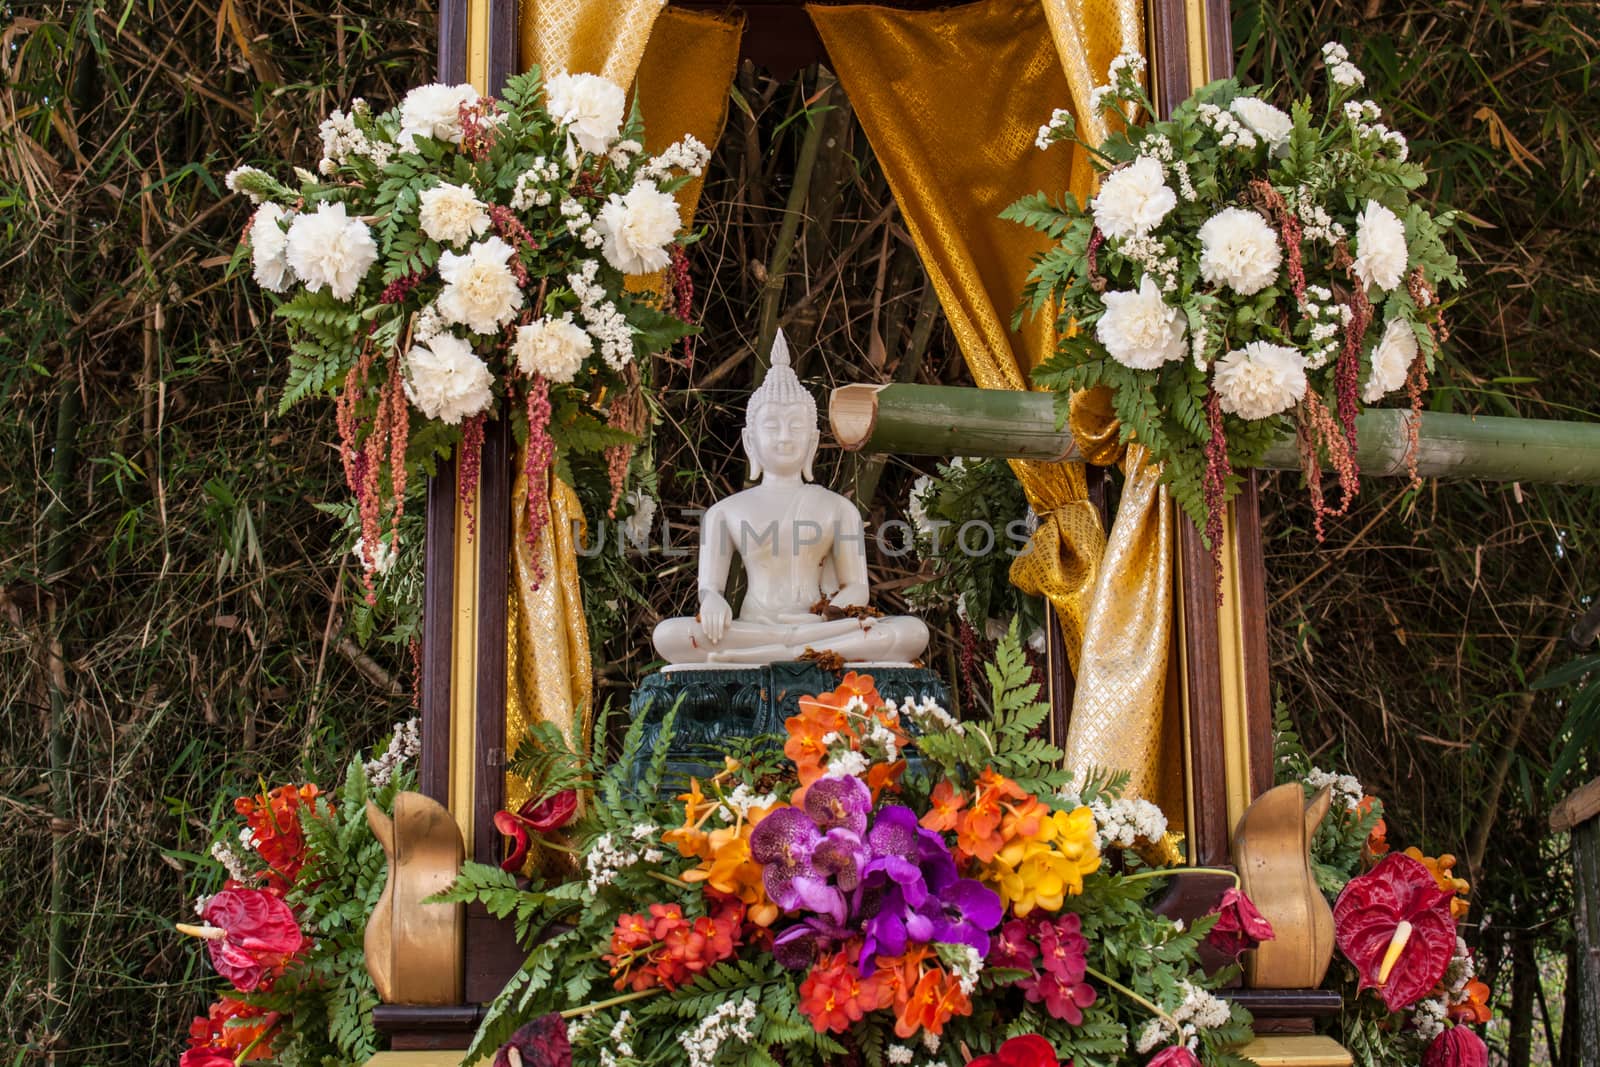 Buddha image and flowers in the annual Buddhist lent songkran festival